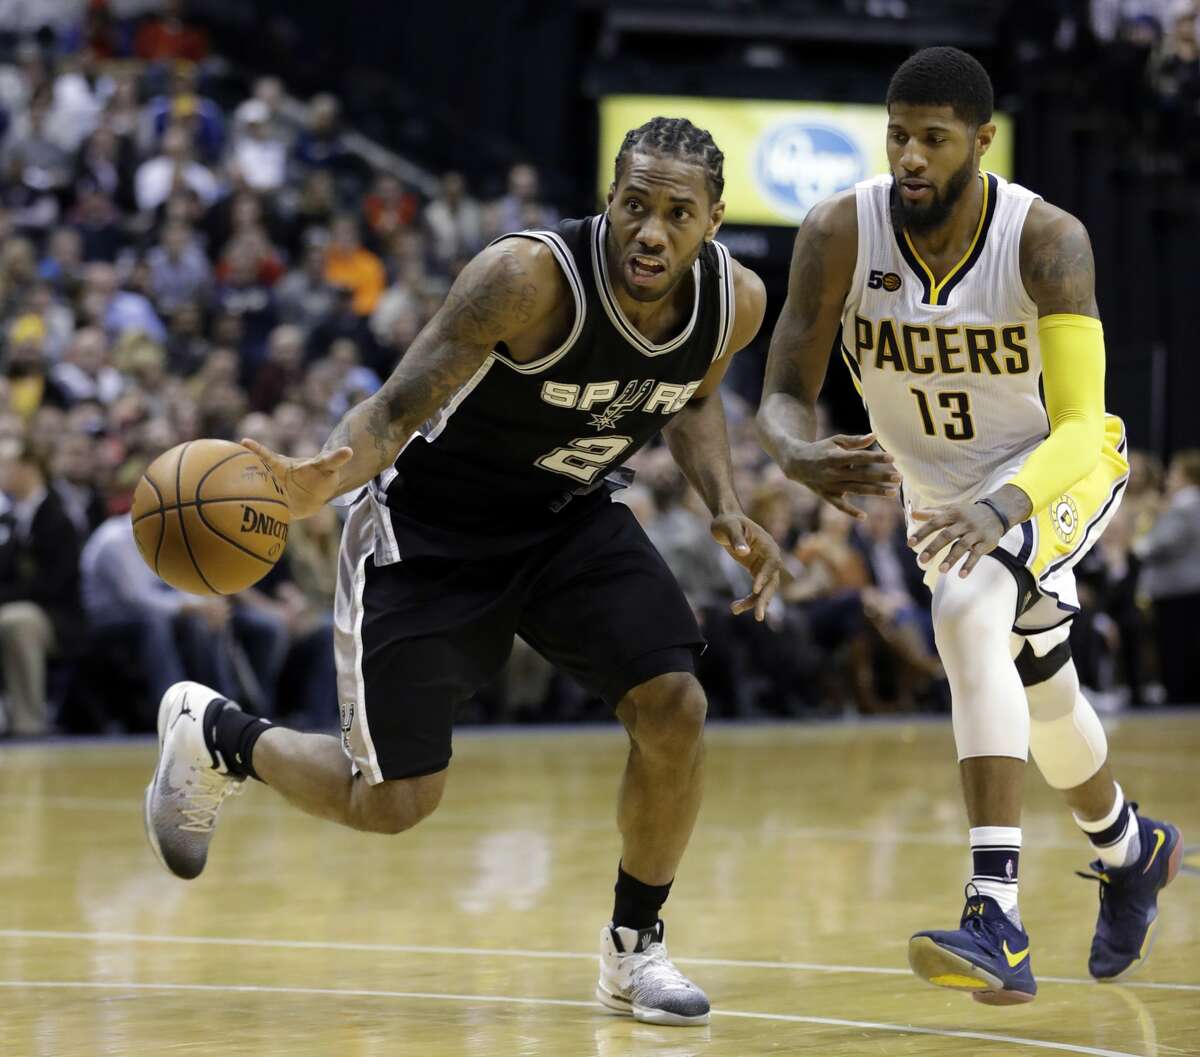 San Antonio Spurs' Kawhi Leonard is chased by Indiana Pacers' Paul George during the second half of an NBA basketball game, Monday, Feb. 13, 2017, in Indianapolis. San Antonio defeated Indiana 110-106. (AP Photo/Darron Cummings)